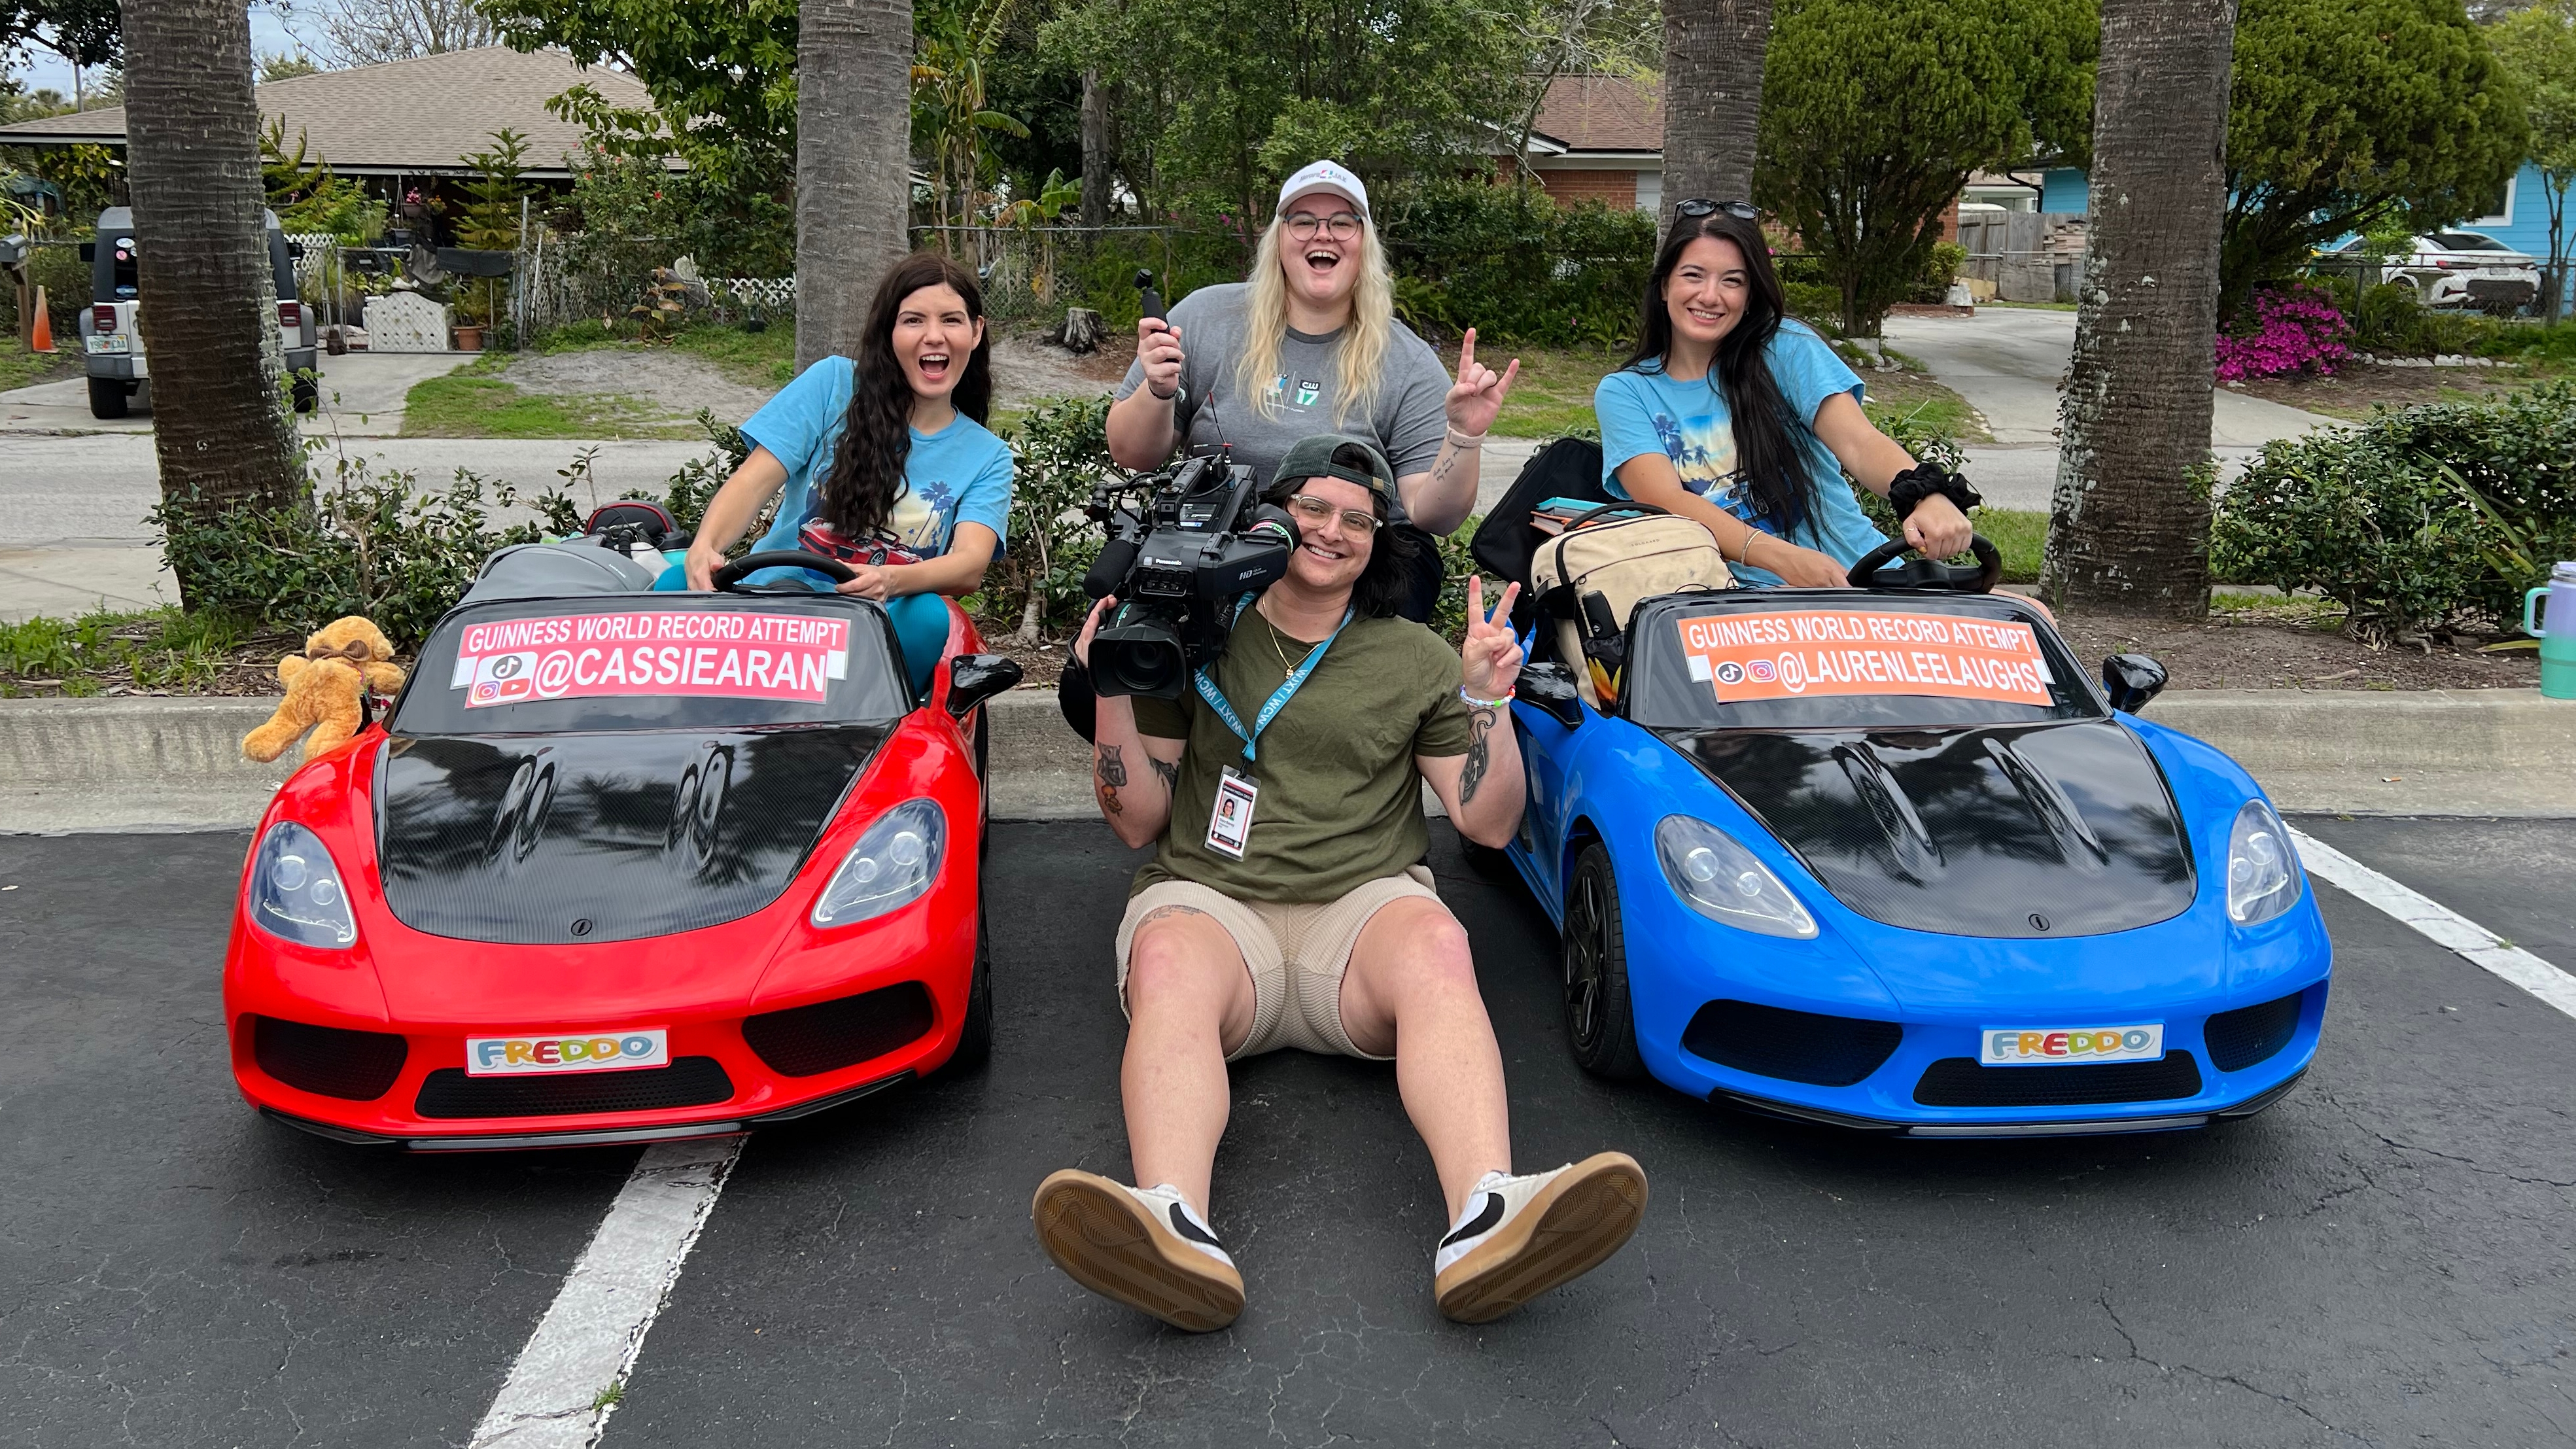 500 miles in a toy car: A Guinness World Record attempt from Jacksonville  to Key West